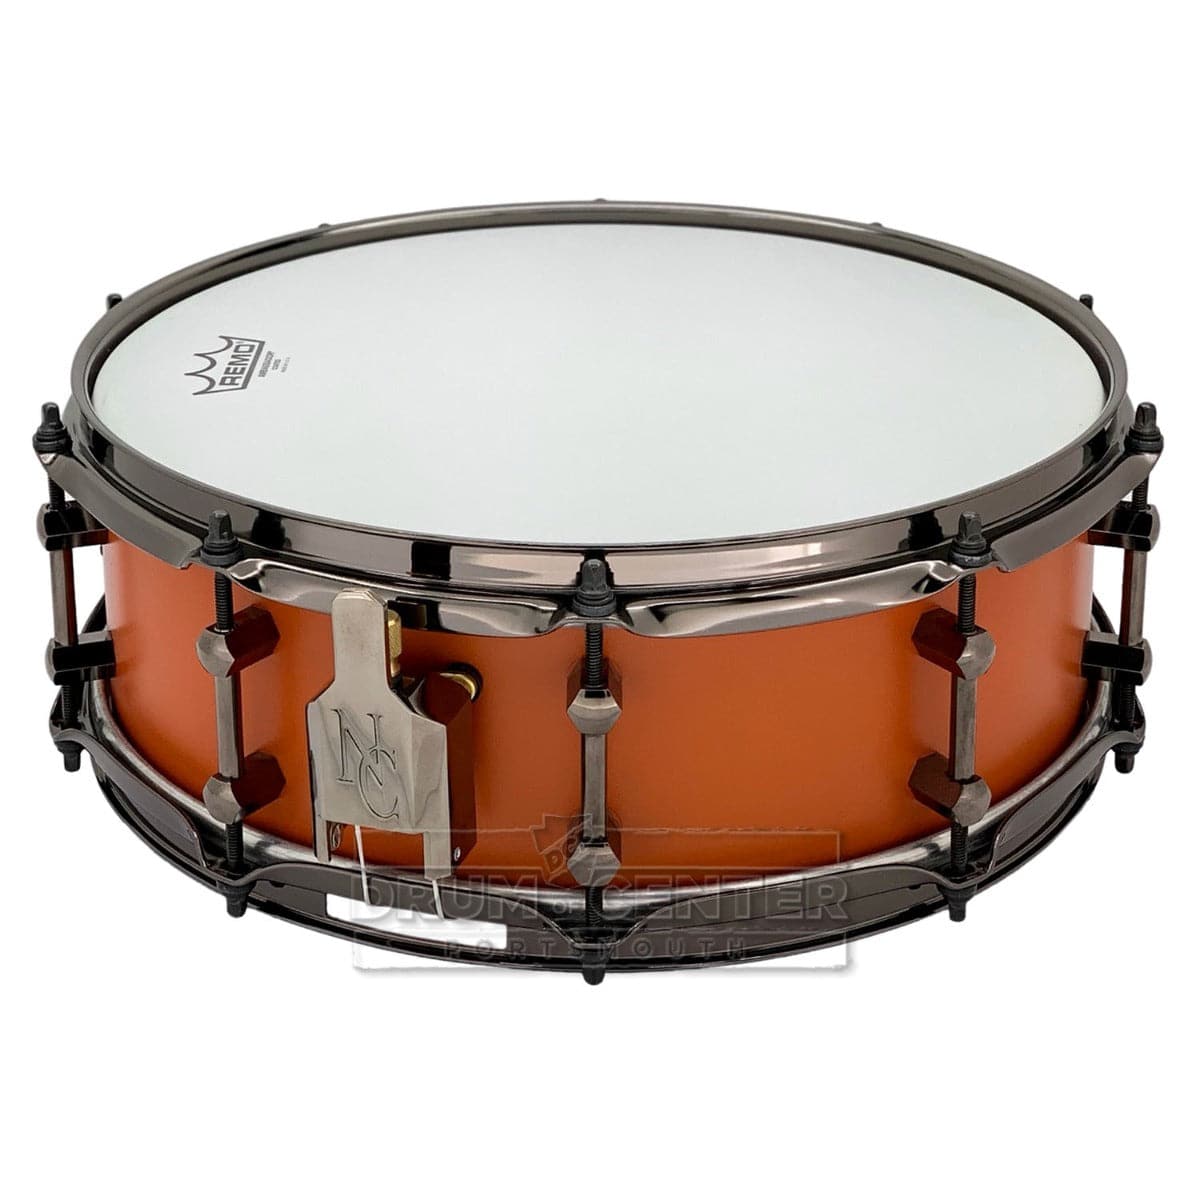 Noble & Cooley Alloy Classic Painted Snare Drum 14x4.75 Flat Orange w/Black Hw